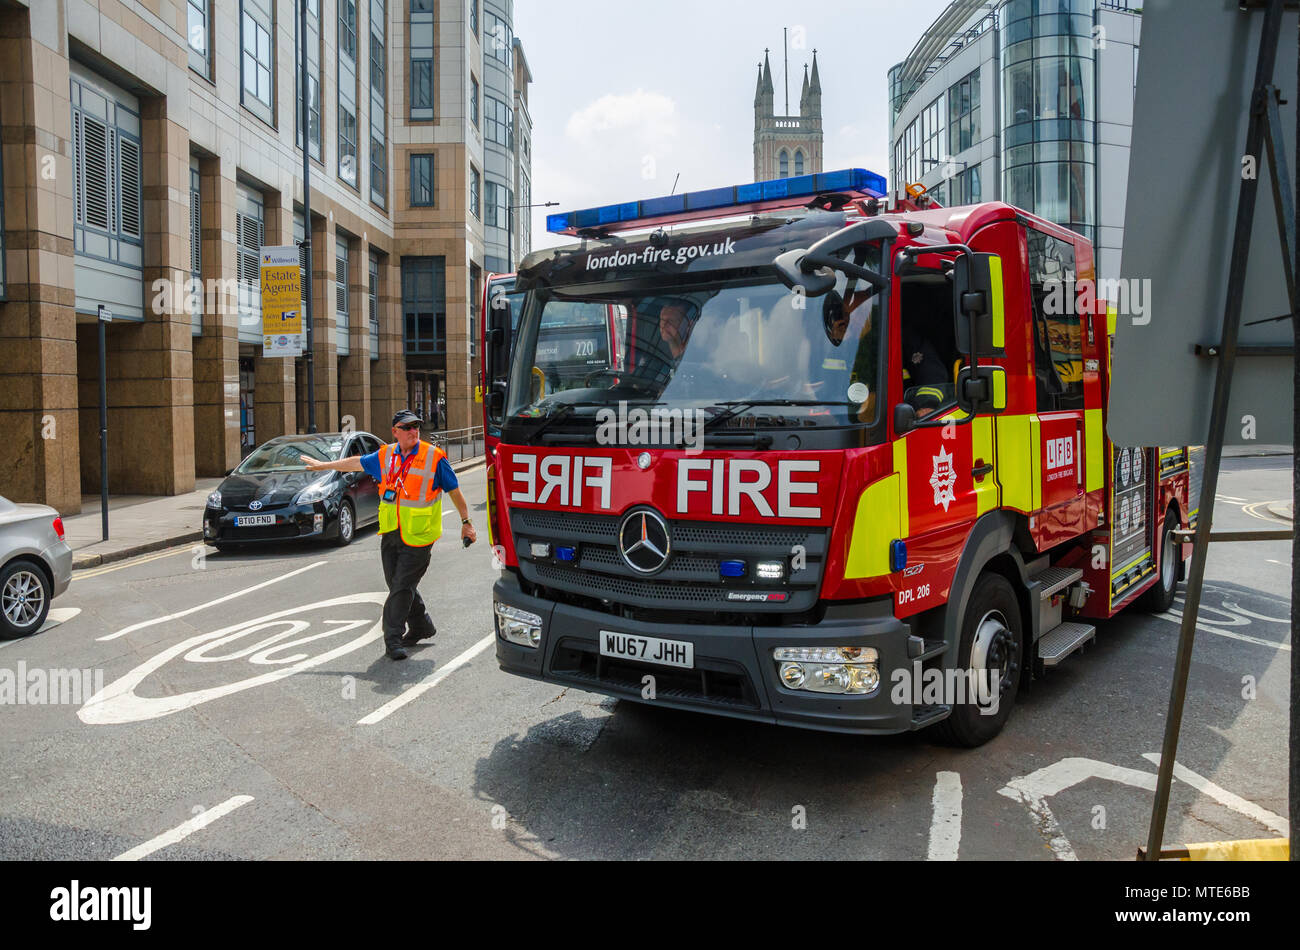 A fire engine belonging to the London Fire Brigade driving through Hammersmith with blue lights and siren blaring. Stock Photo